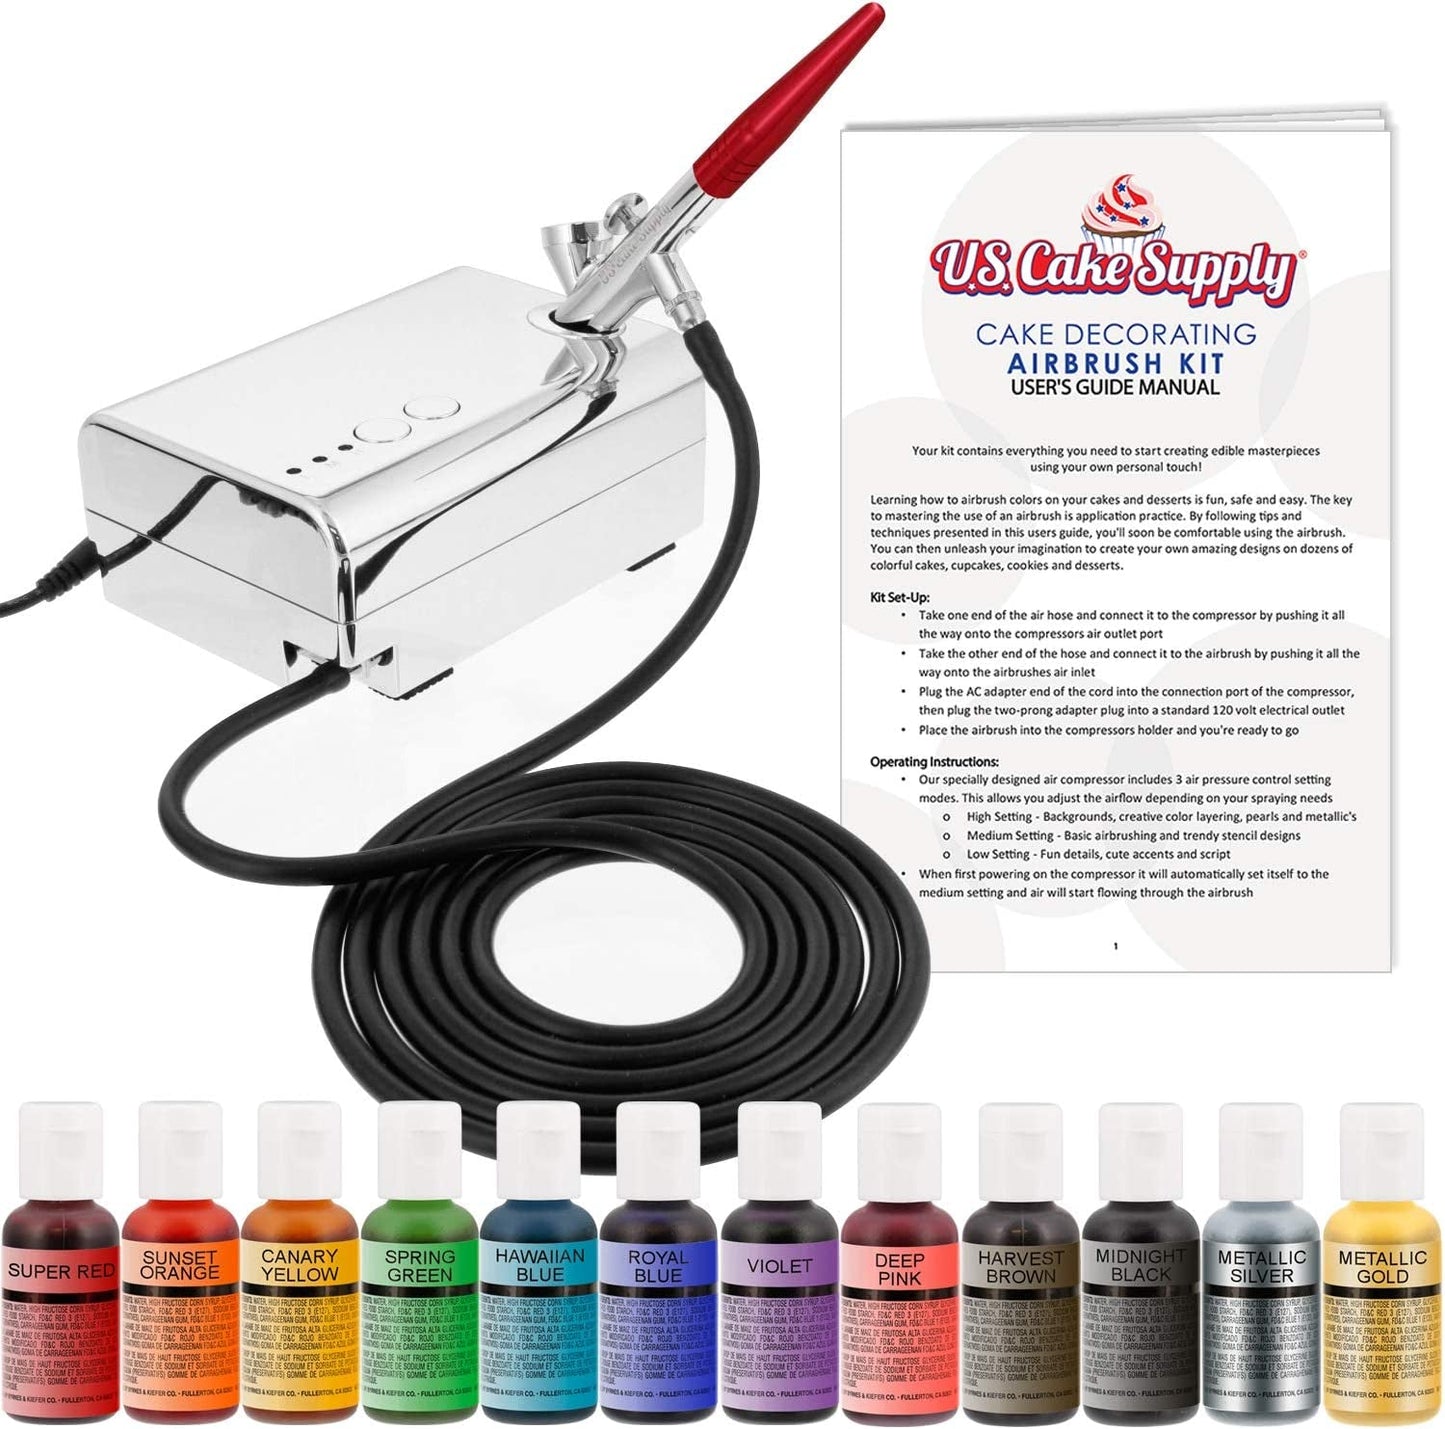 '- Complete Cake Decorating Airbrush Kit with a Full Selection of 12 Vivid Airbrush Food Colors - Decorate Cakes, Cupcakes, Cookies & Desserts